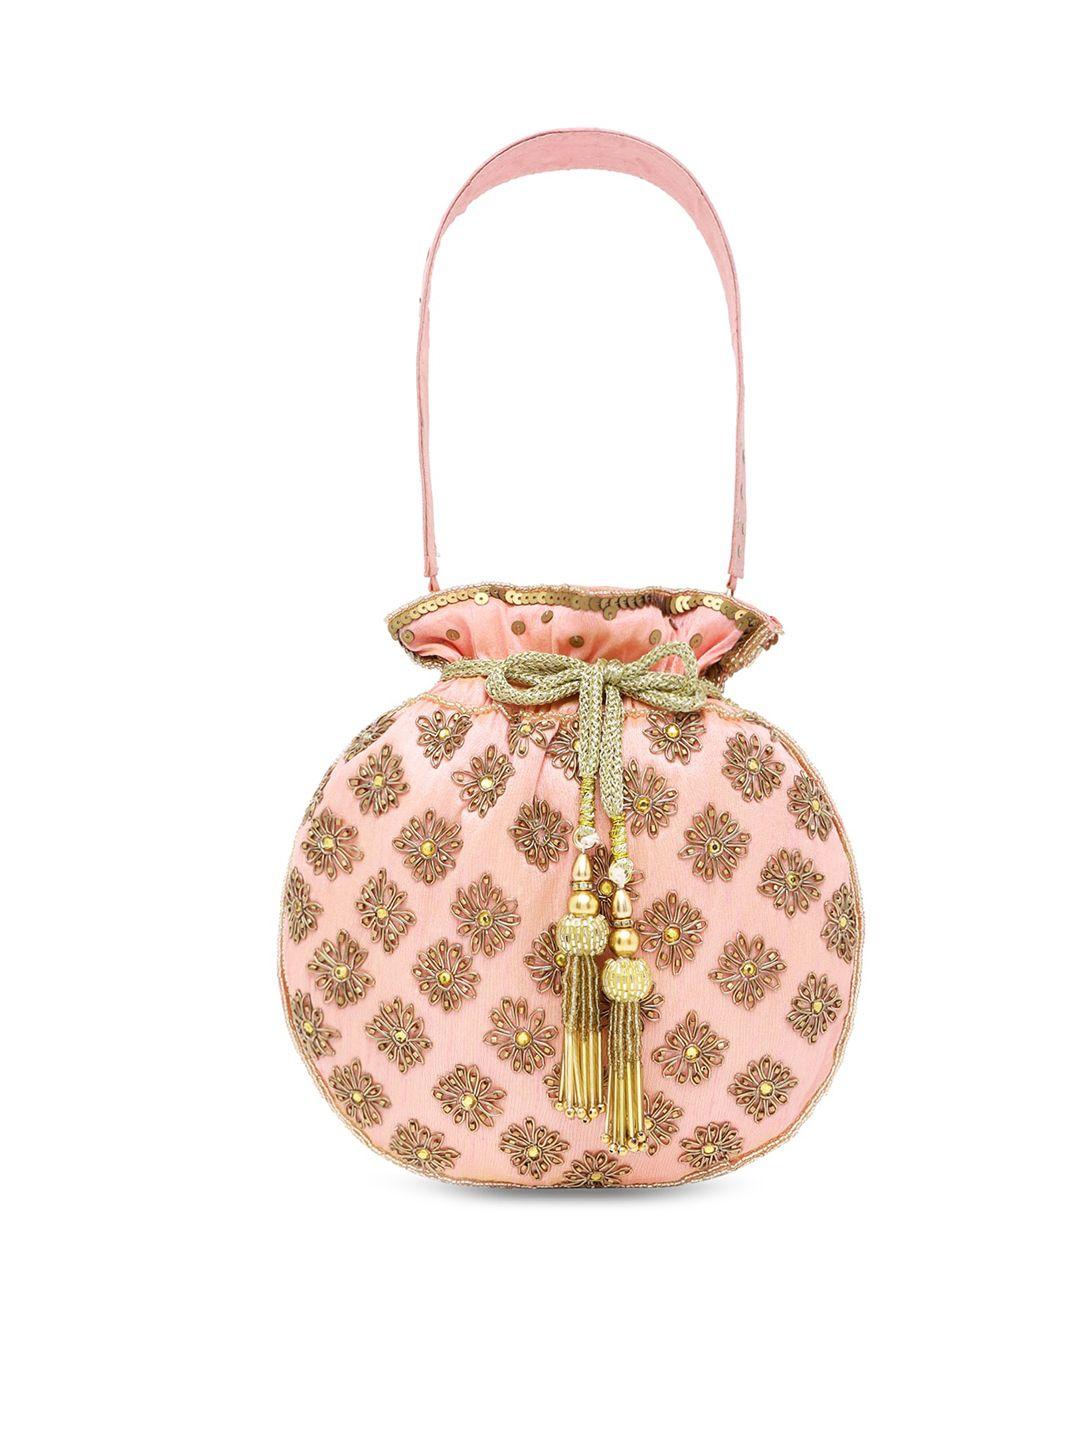 peora peach-coloured & gold-toned embroidered potli clutch